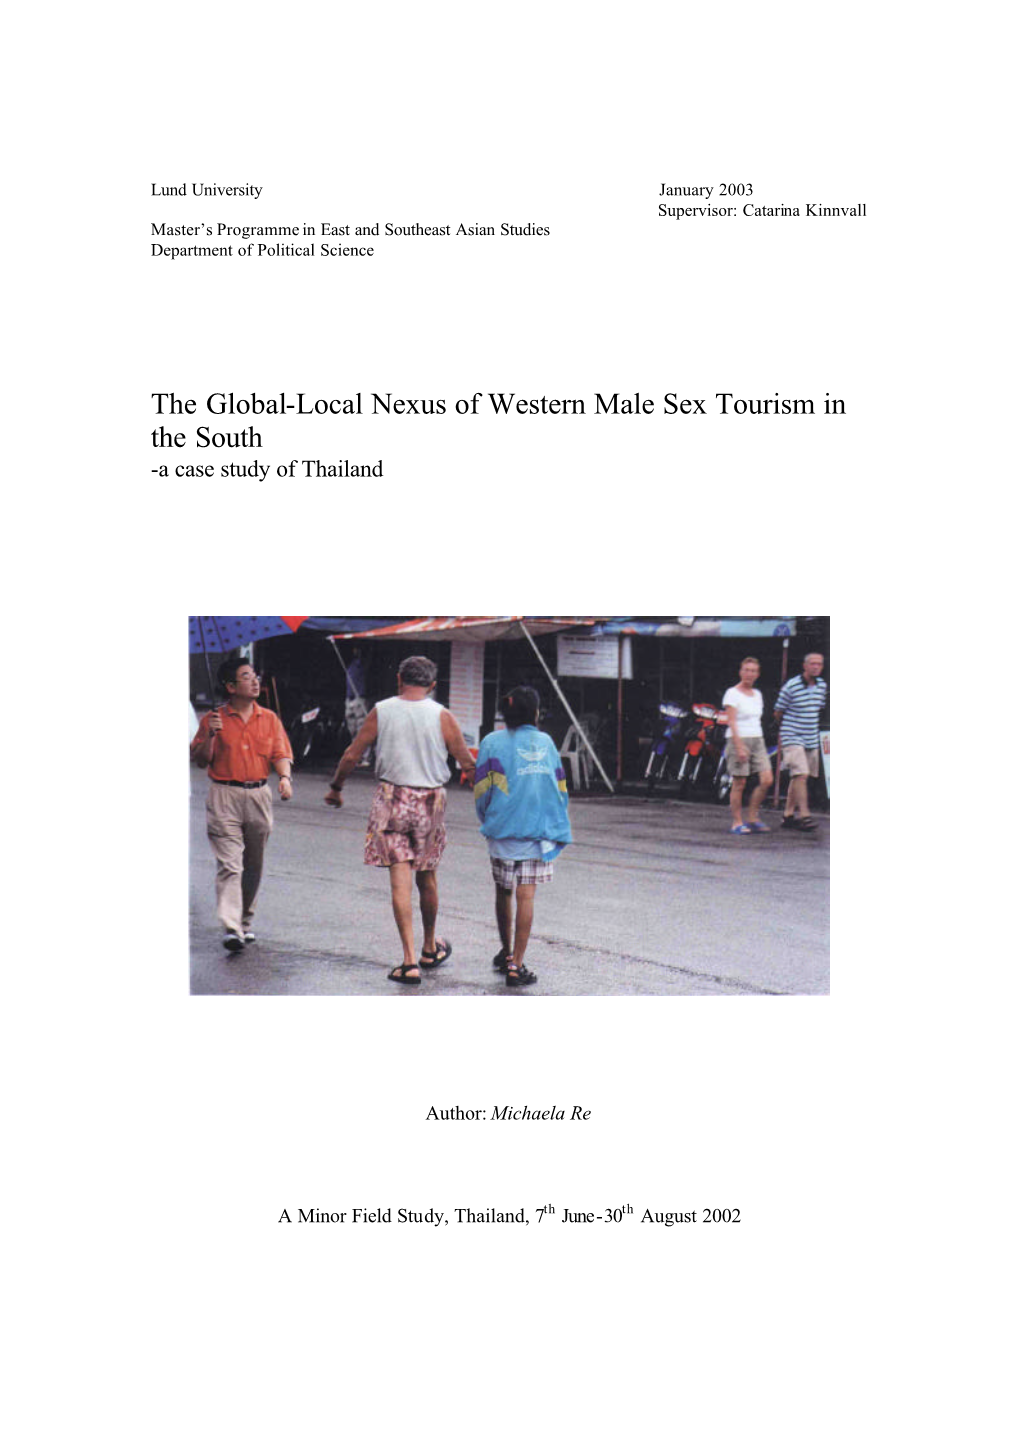 The Global-Local Nexus of Western Male Sex Tourism in the South -A Case Study of Thailand